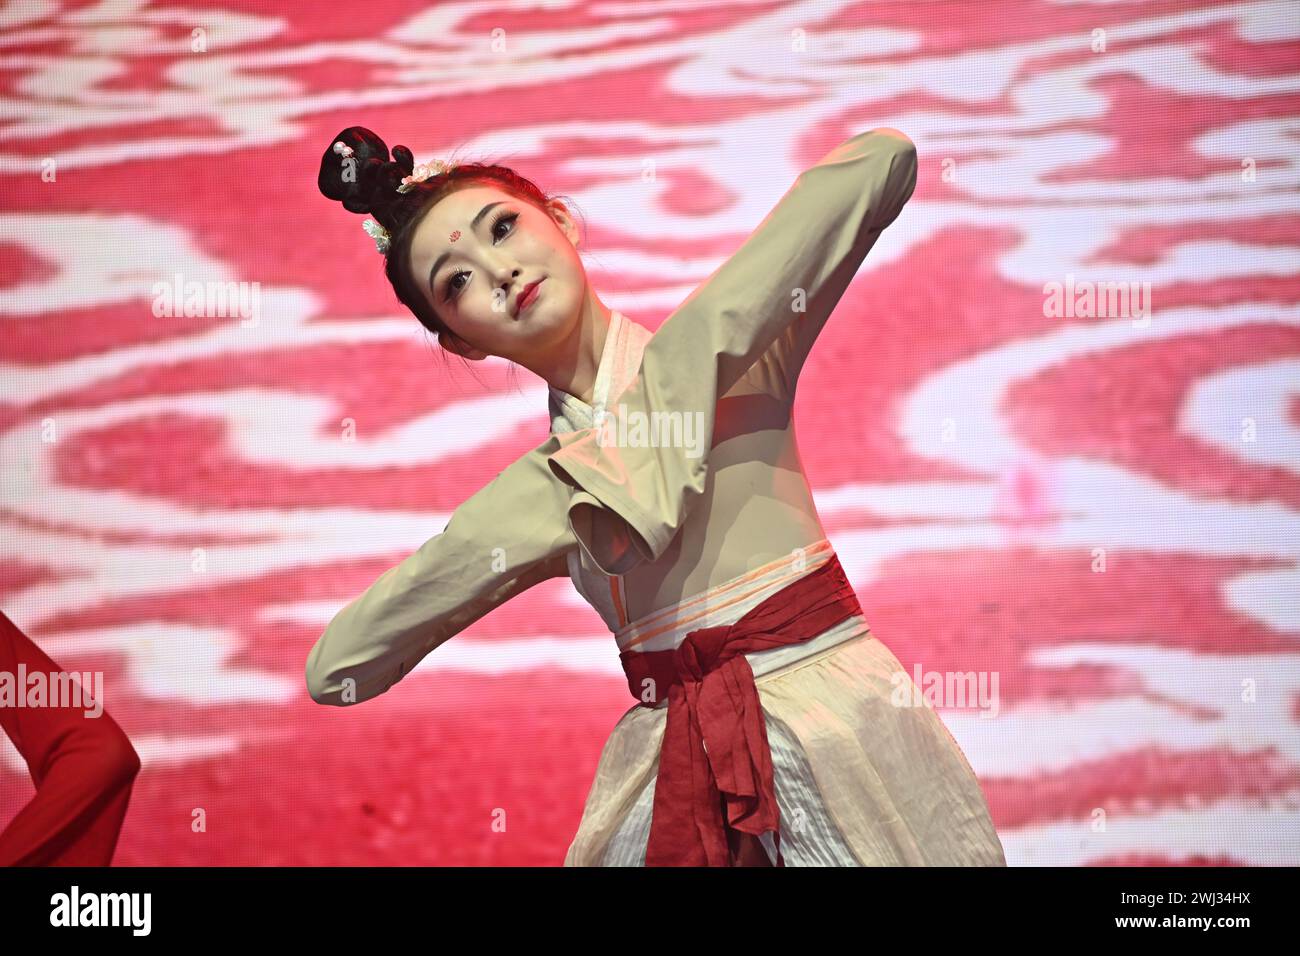 Trafalgar square, London, UK, 11 February 2024: Chinese sleeve dance preforms at the 2024 Lunar New Year a spectacular show this year for the 2024 Lunar New Year, with the CPC sponsoring the entire performances that comes from Beijing and Guangzhou. The Lunar New Year is also known as Chinese New Year or Spring Festival. The Chinese celebration in London attracted thousands of people. Experience traditional dragon and flying lion dances and fun-filled stage performances from China, including Beijing opera and acrobatics, martial arts displays, and ancient magic in London, UK. Stock Photo